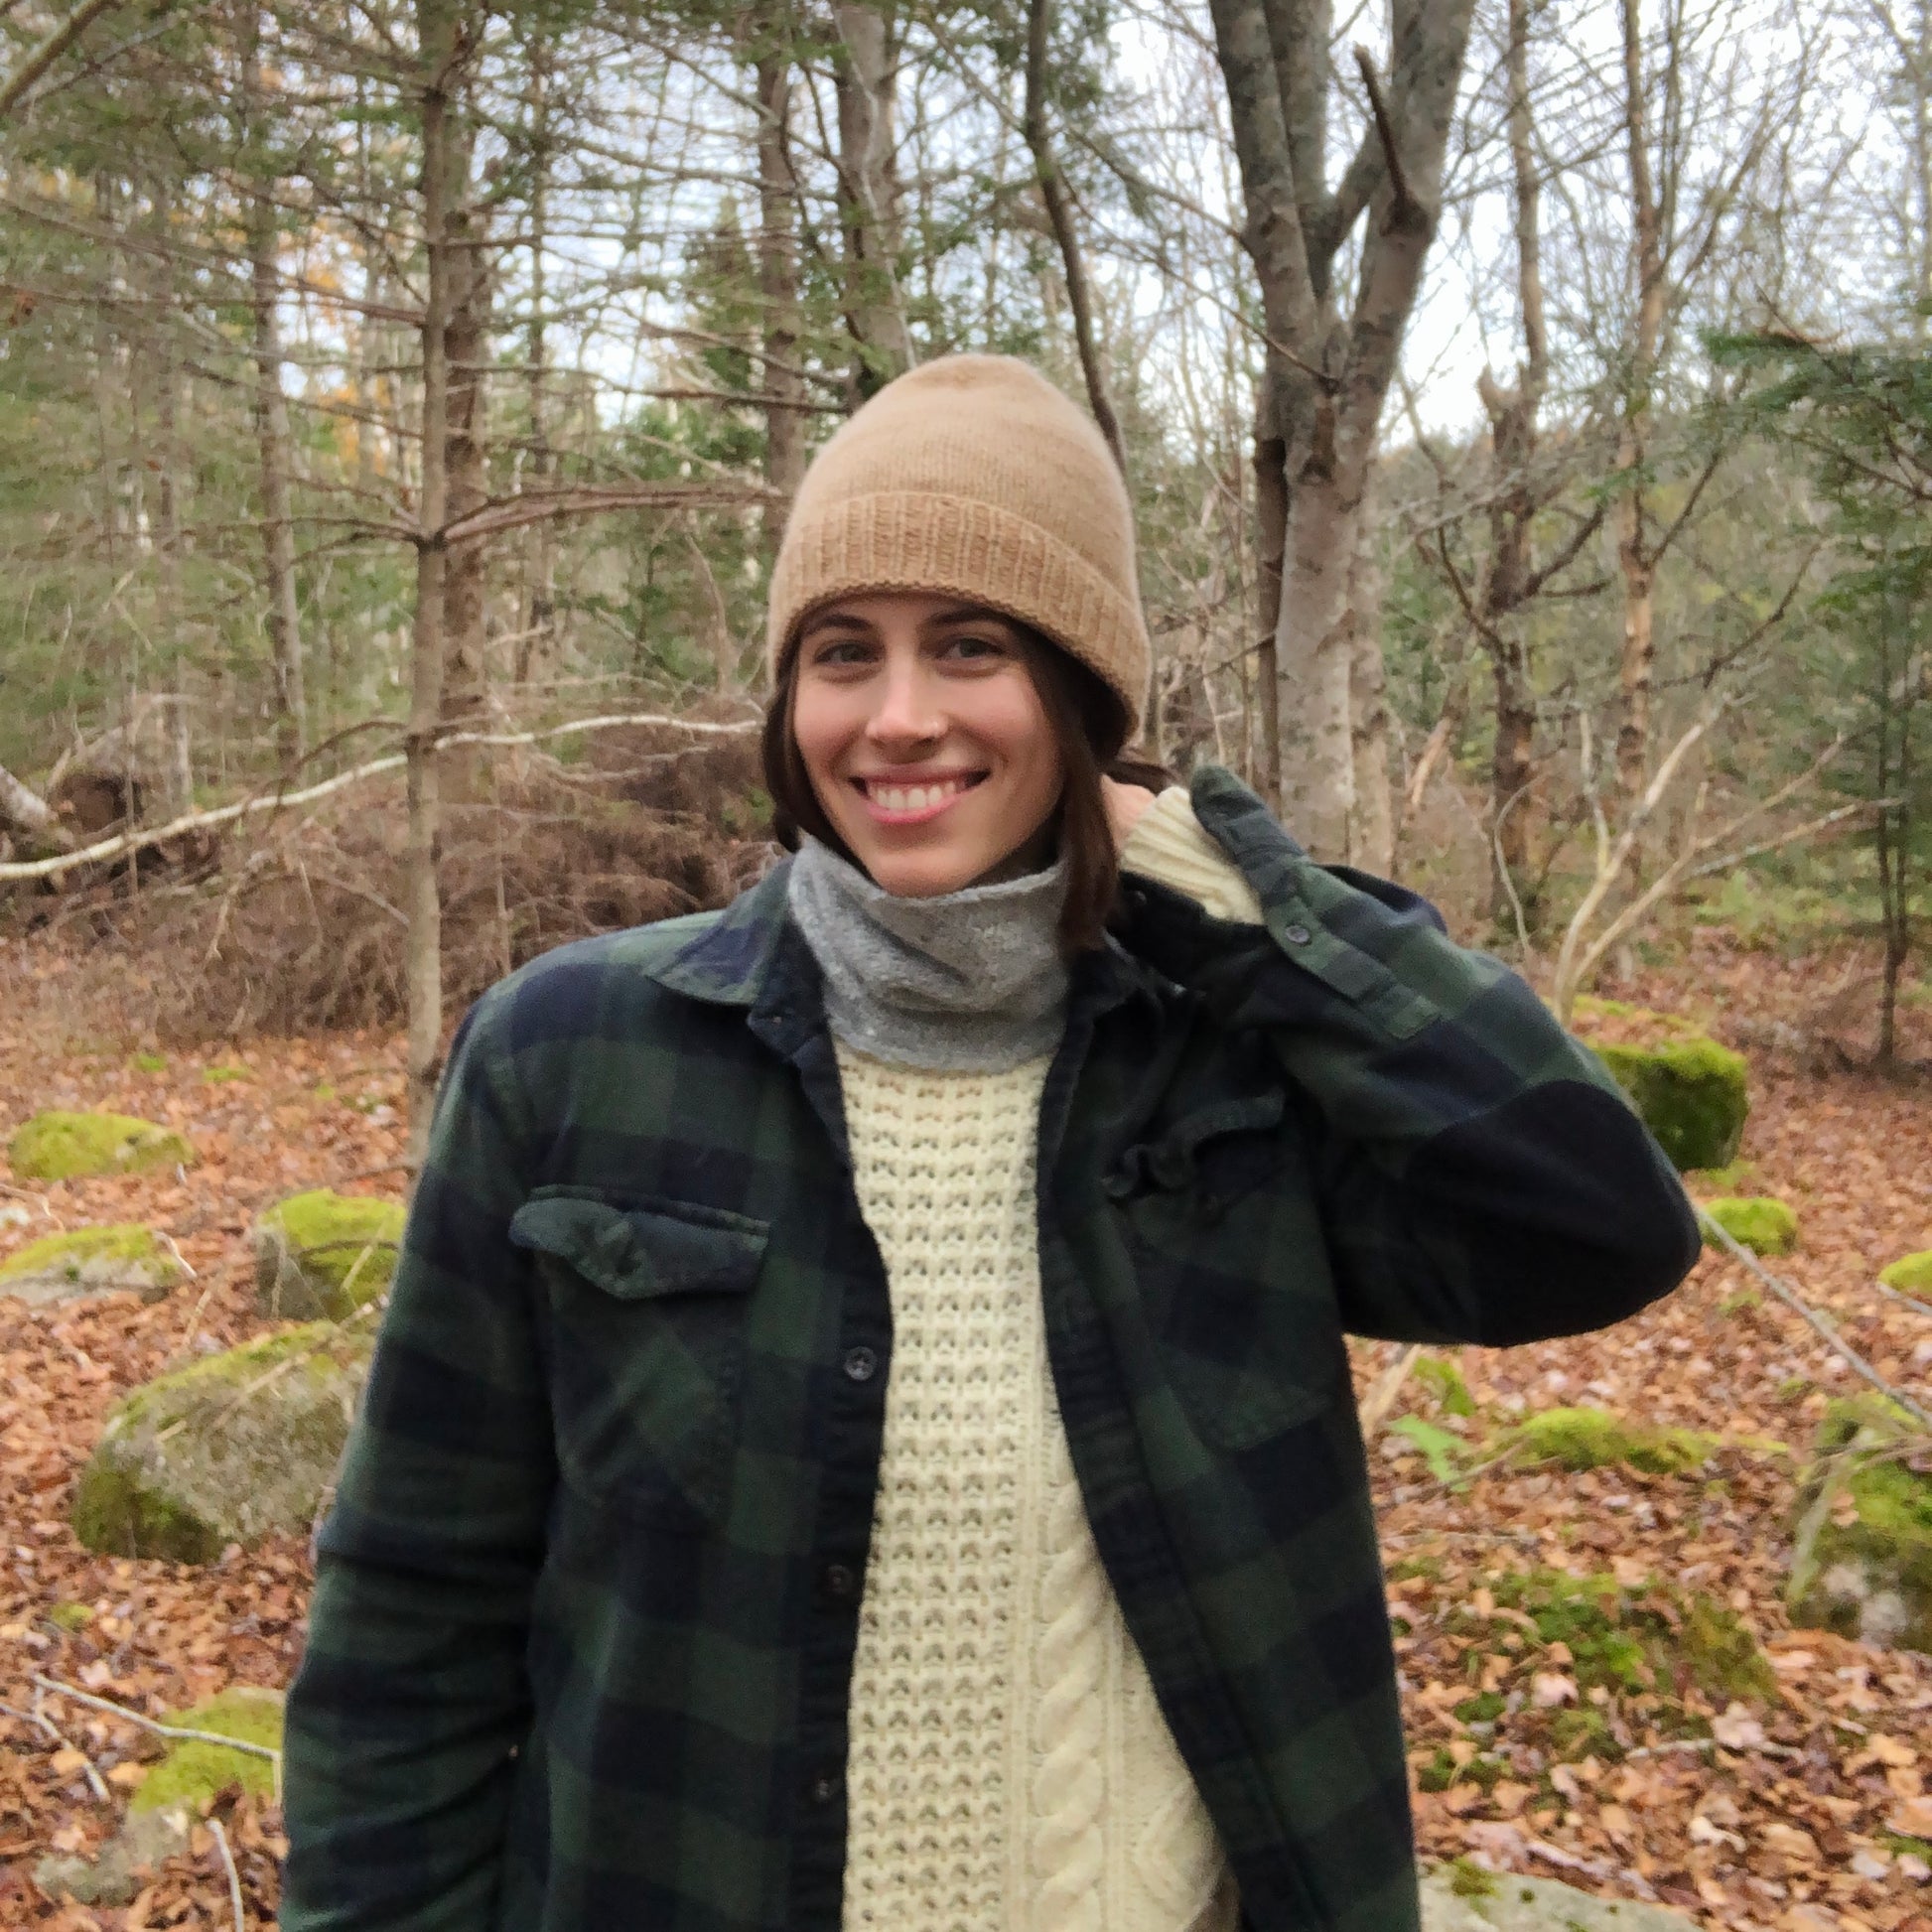 Pam wearing the grey nor'easter paired with the cashmere toque, dark green plaid shirt and cream knit sweater underneath. She is standing in the forest and posing for the camera.